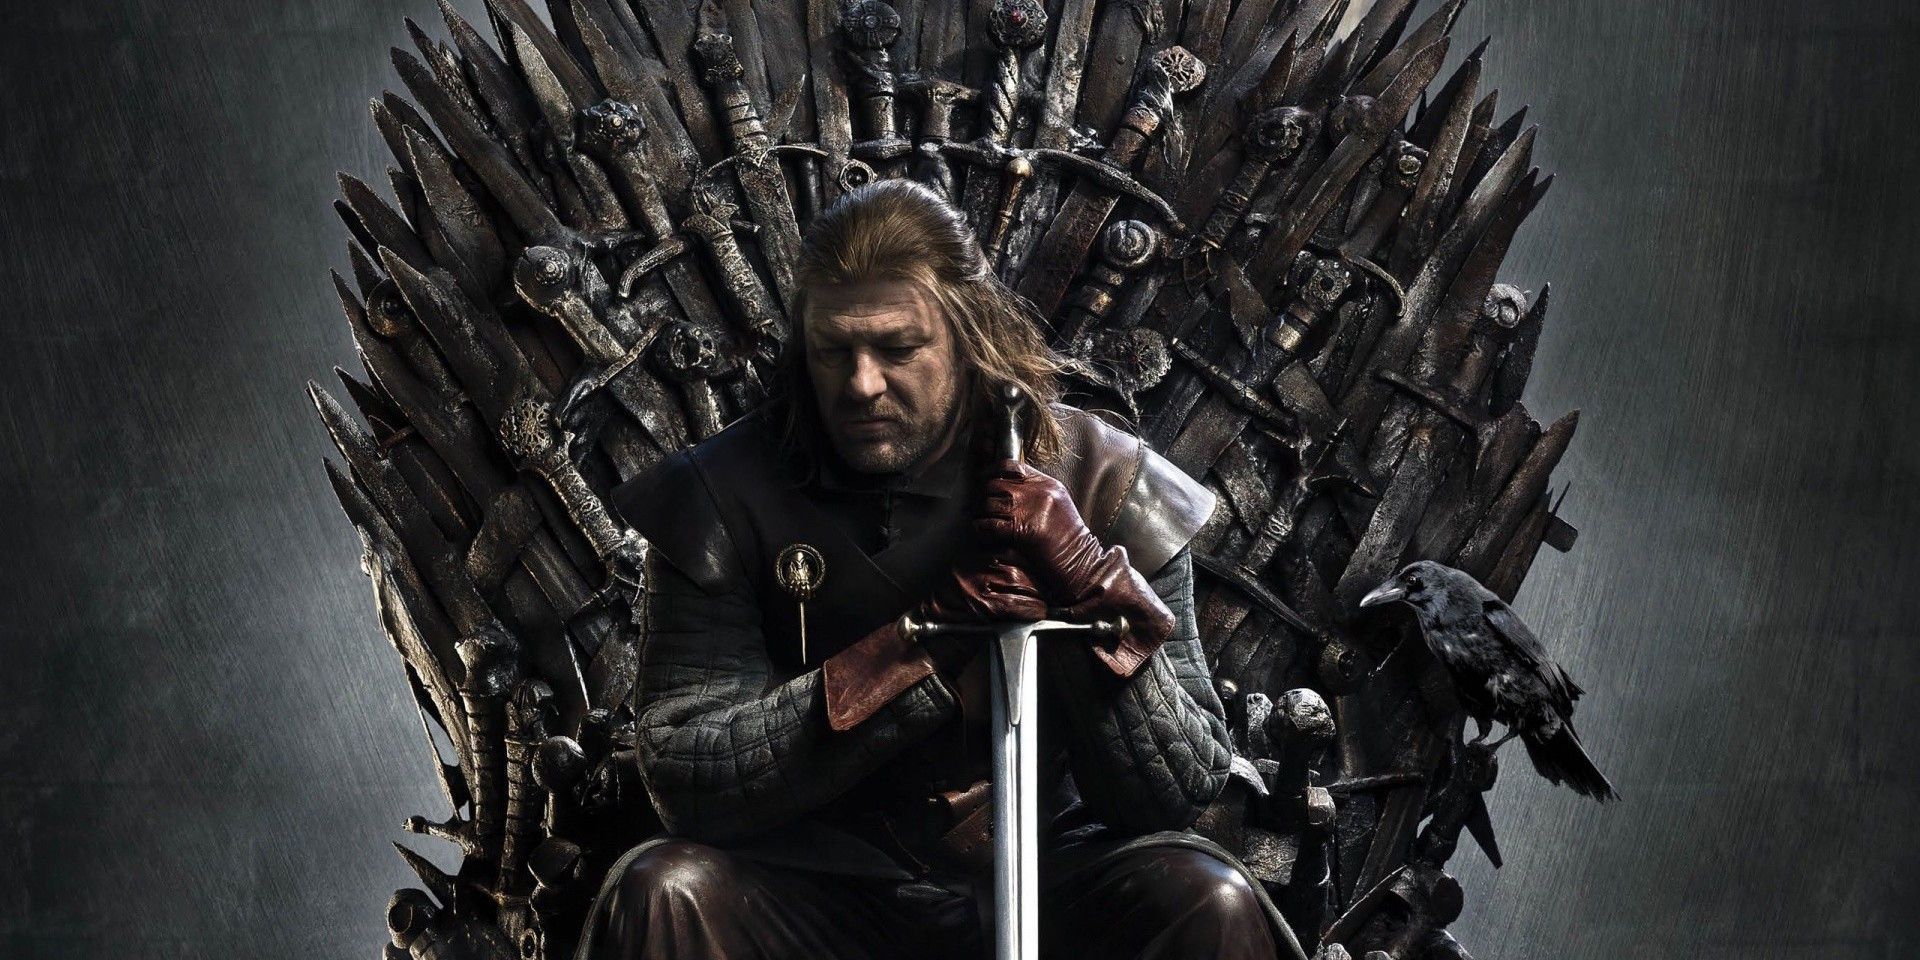 Ned Stark on the Iron Throne in a promo image for Game of Thrones.